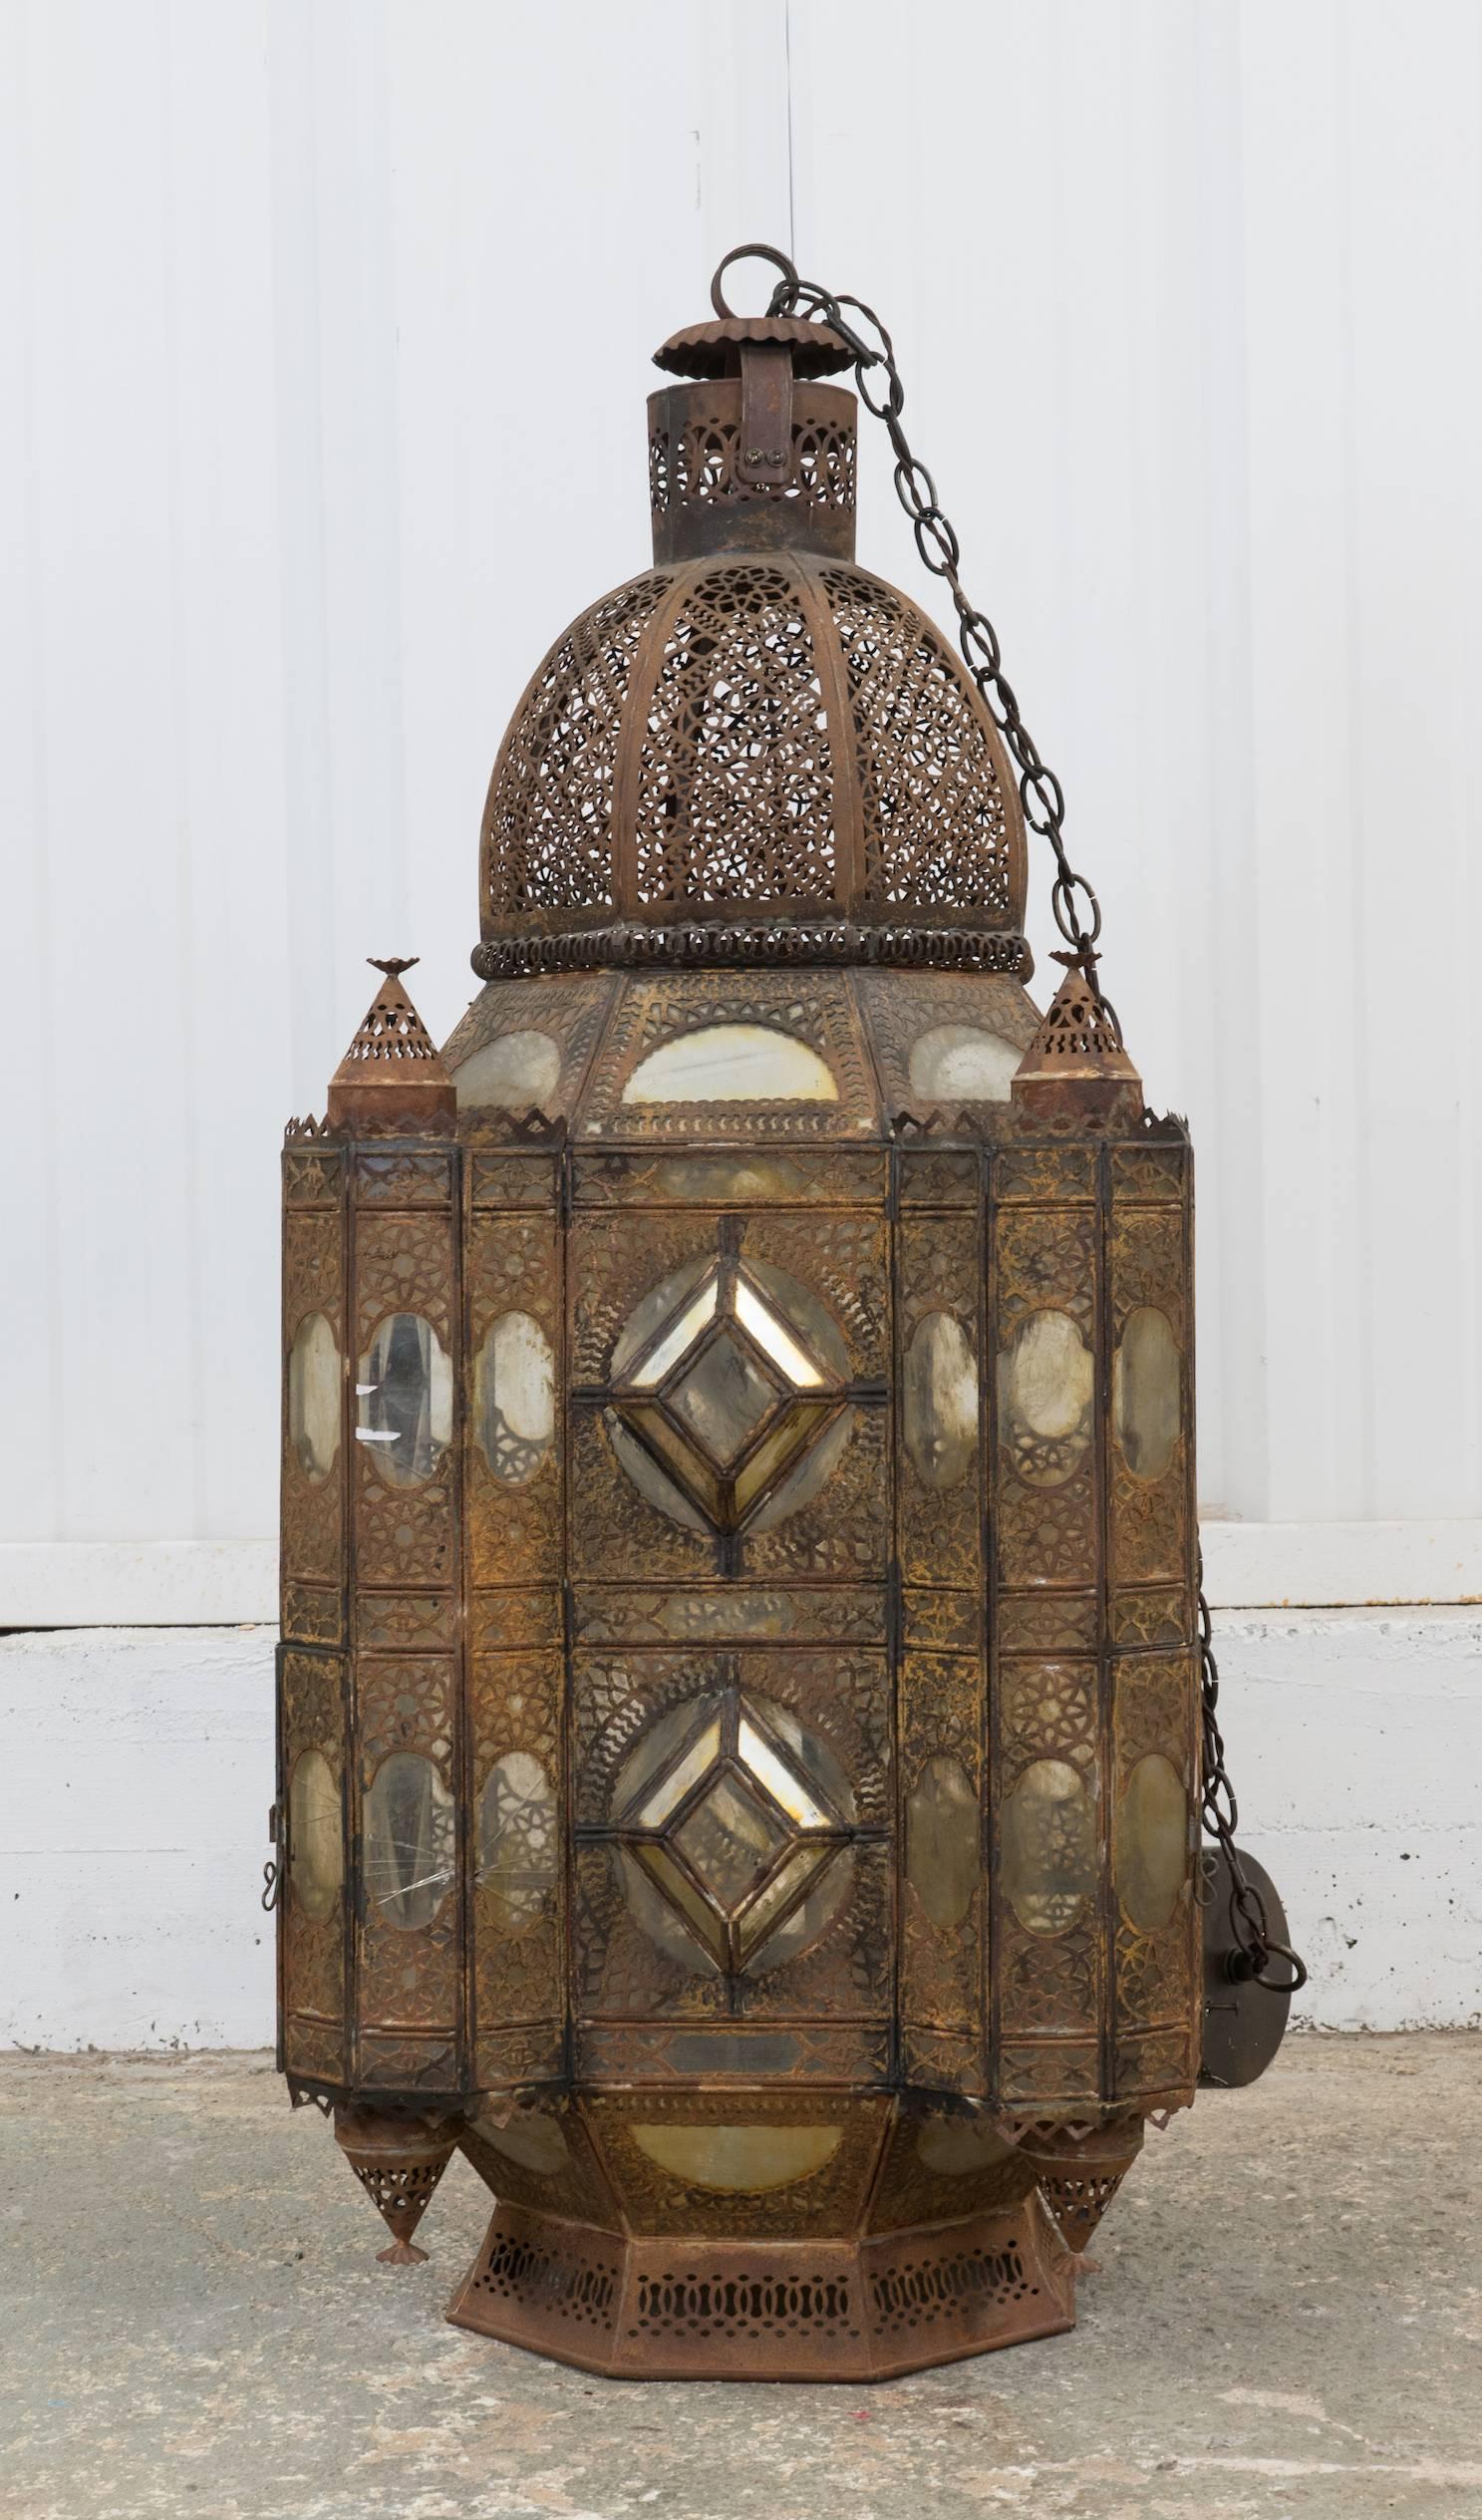 19th century Moroccan hanging lantern in fabulous condition.